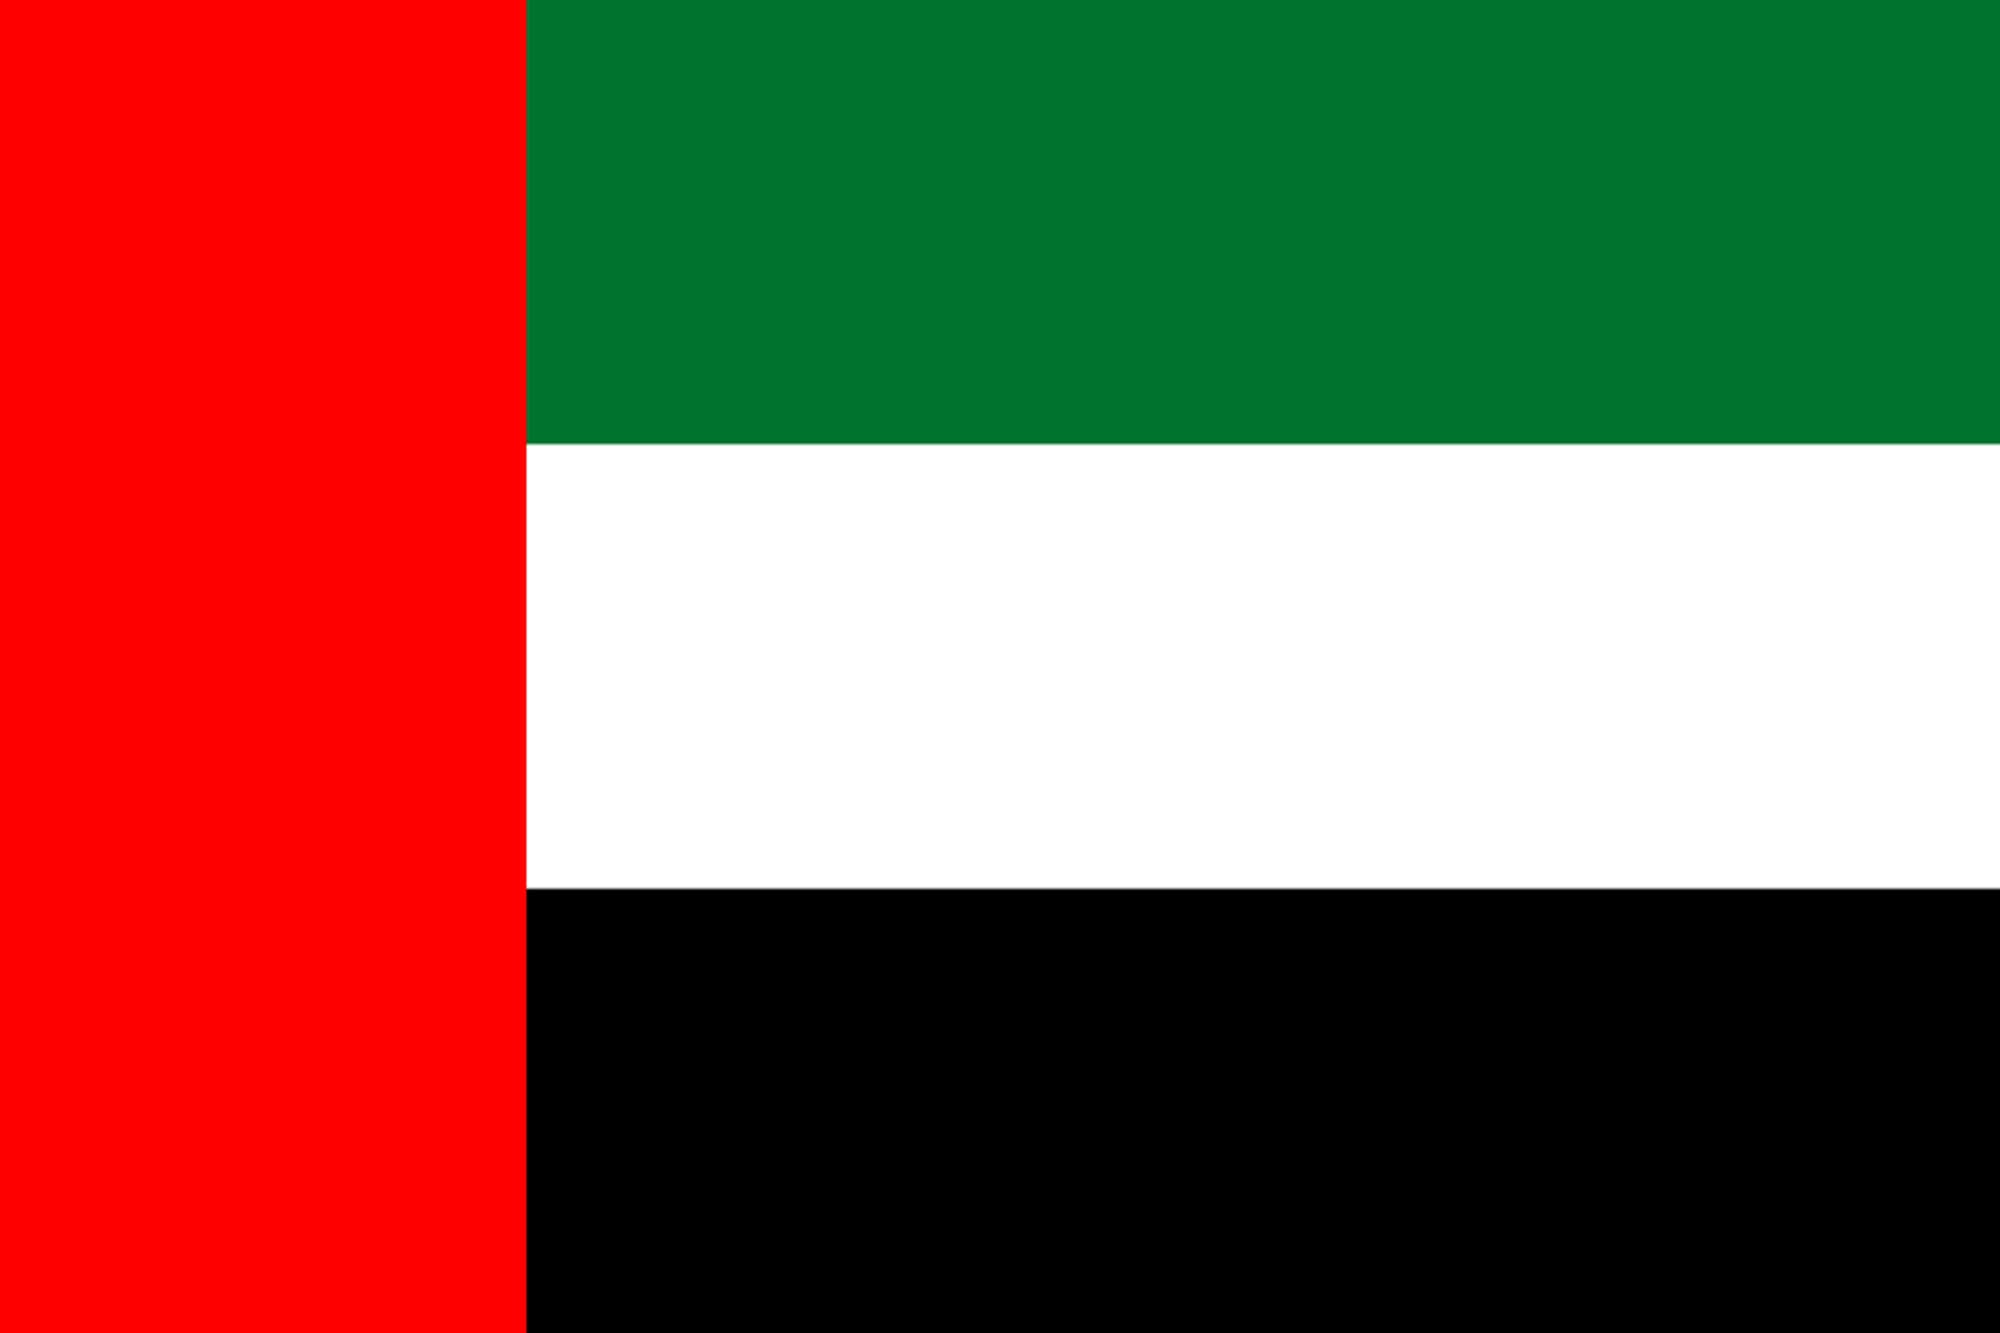 IMMAF Welcomes The UAE Mixed Martial Arts Federation